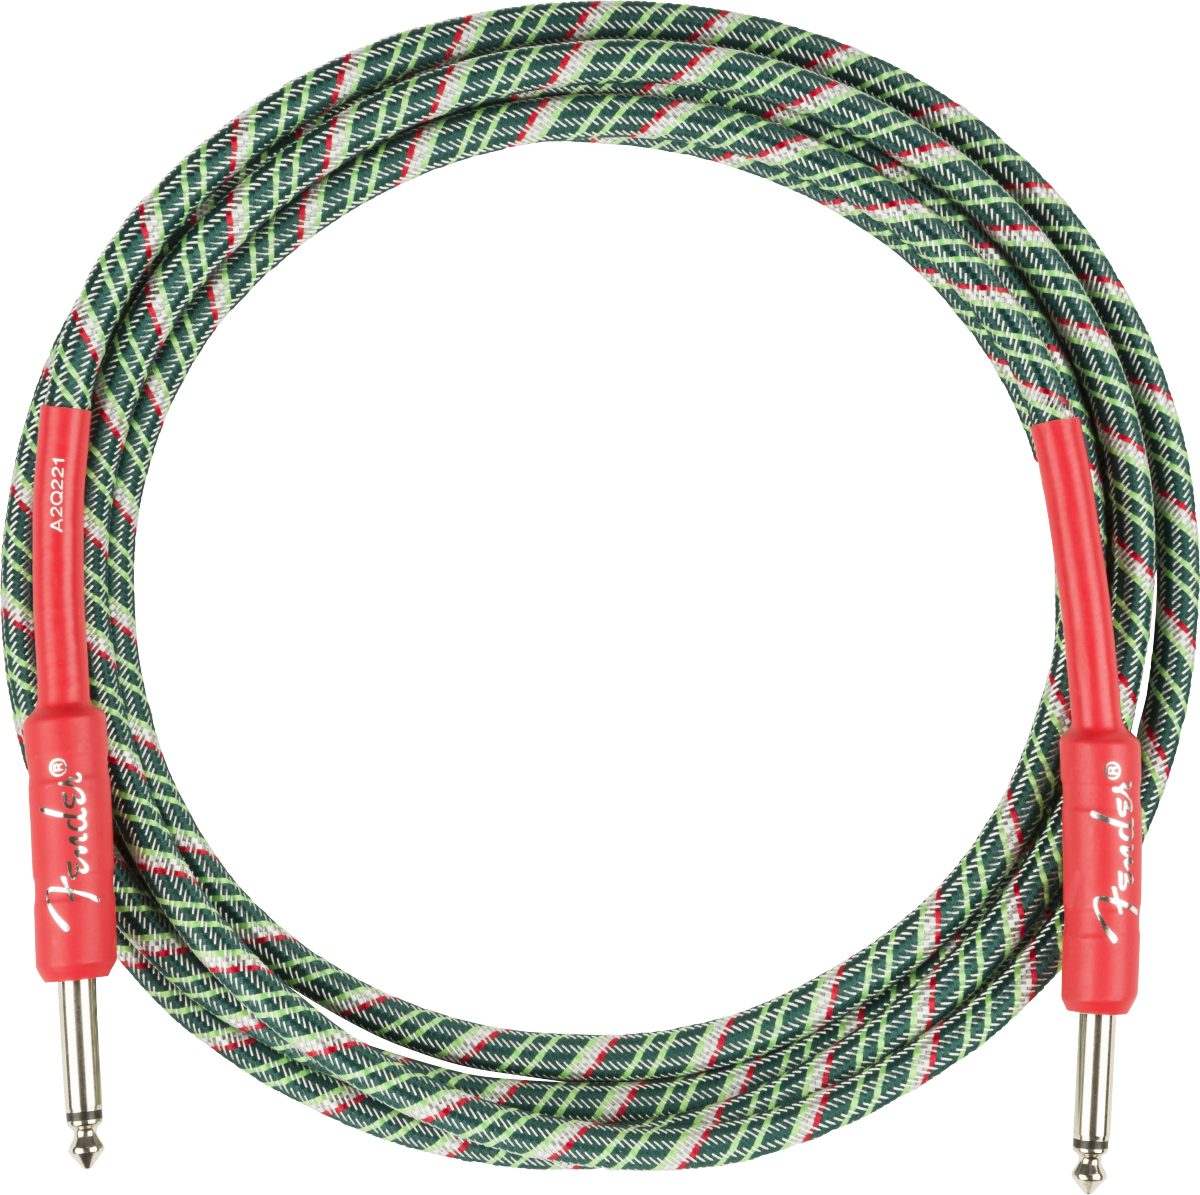 Fender Wreath Holiday Instrument Cable Droit Droit 10ft Red/green - Kabel - Main picture